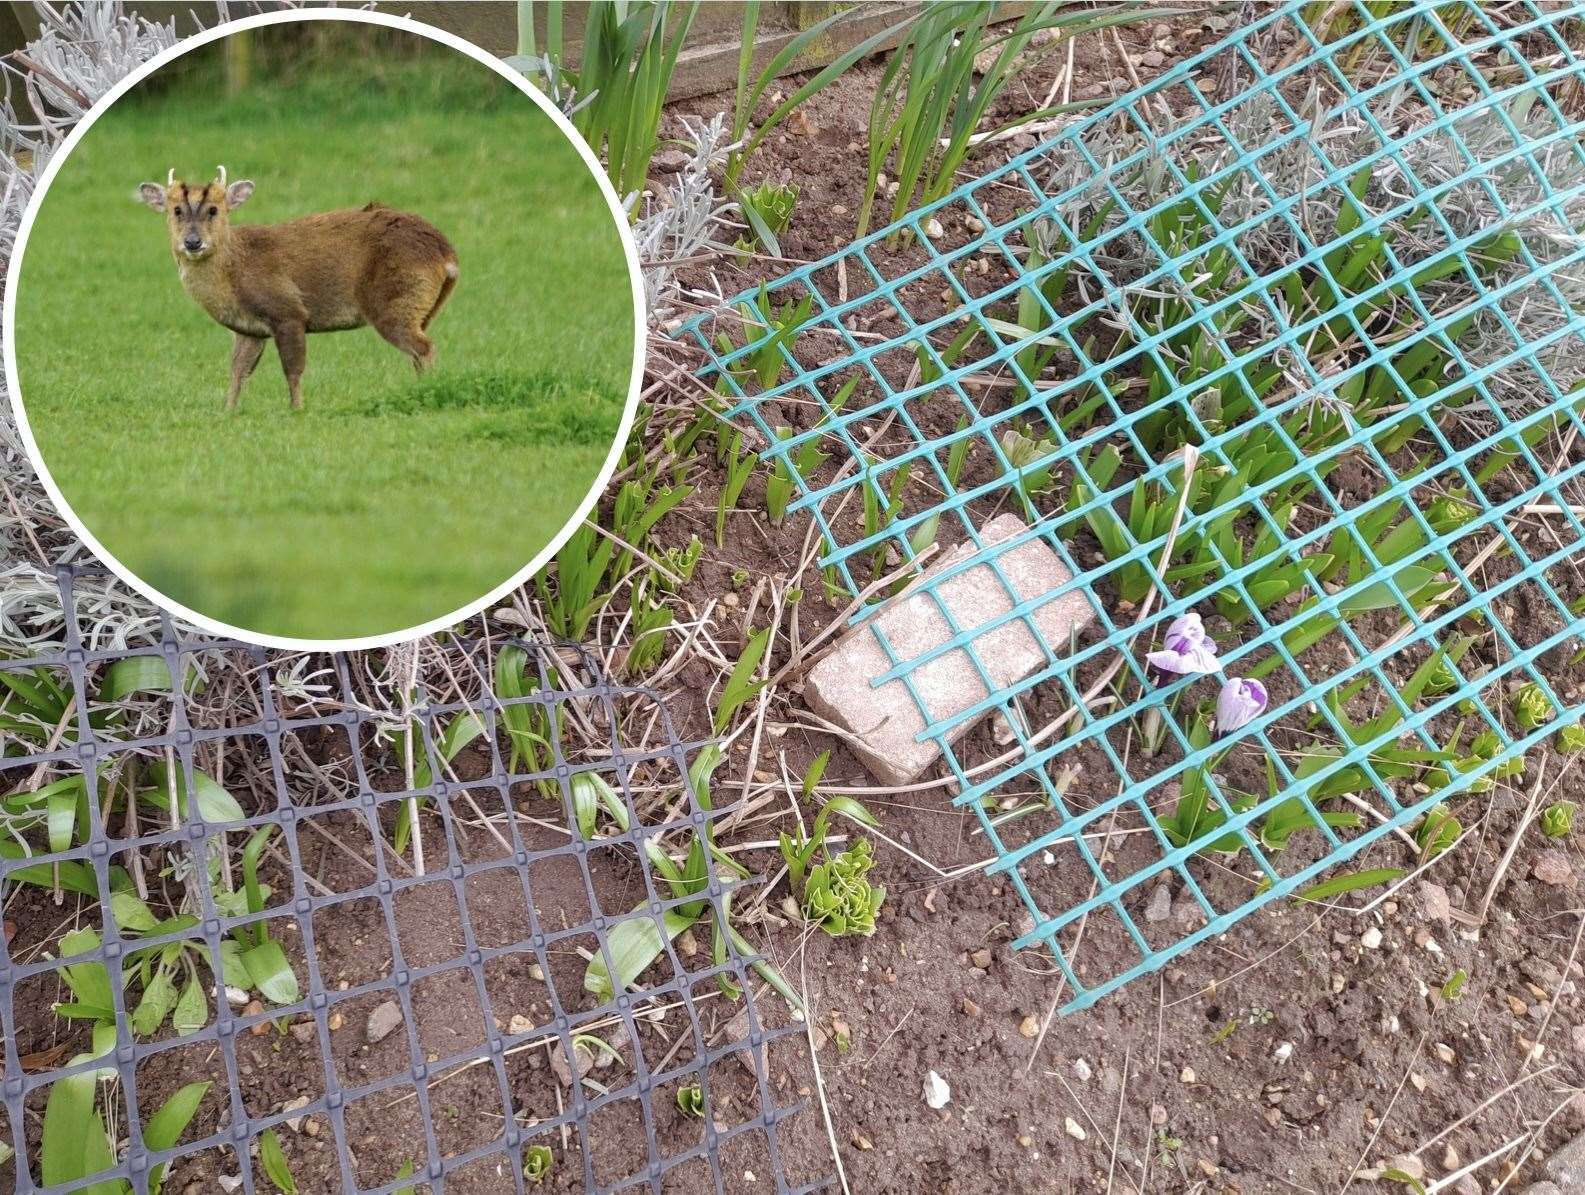 Damage caused in Reffley resident Graham Price's garden. Muntjac picture: Paul Brackley